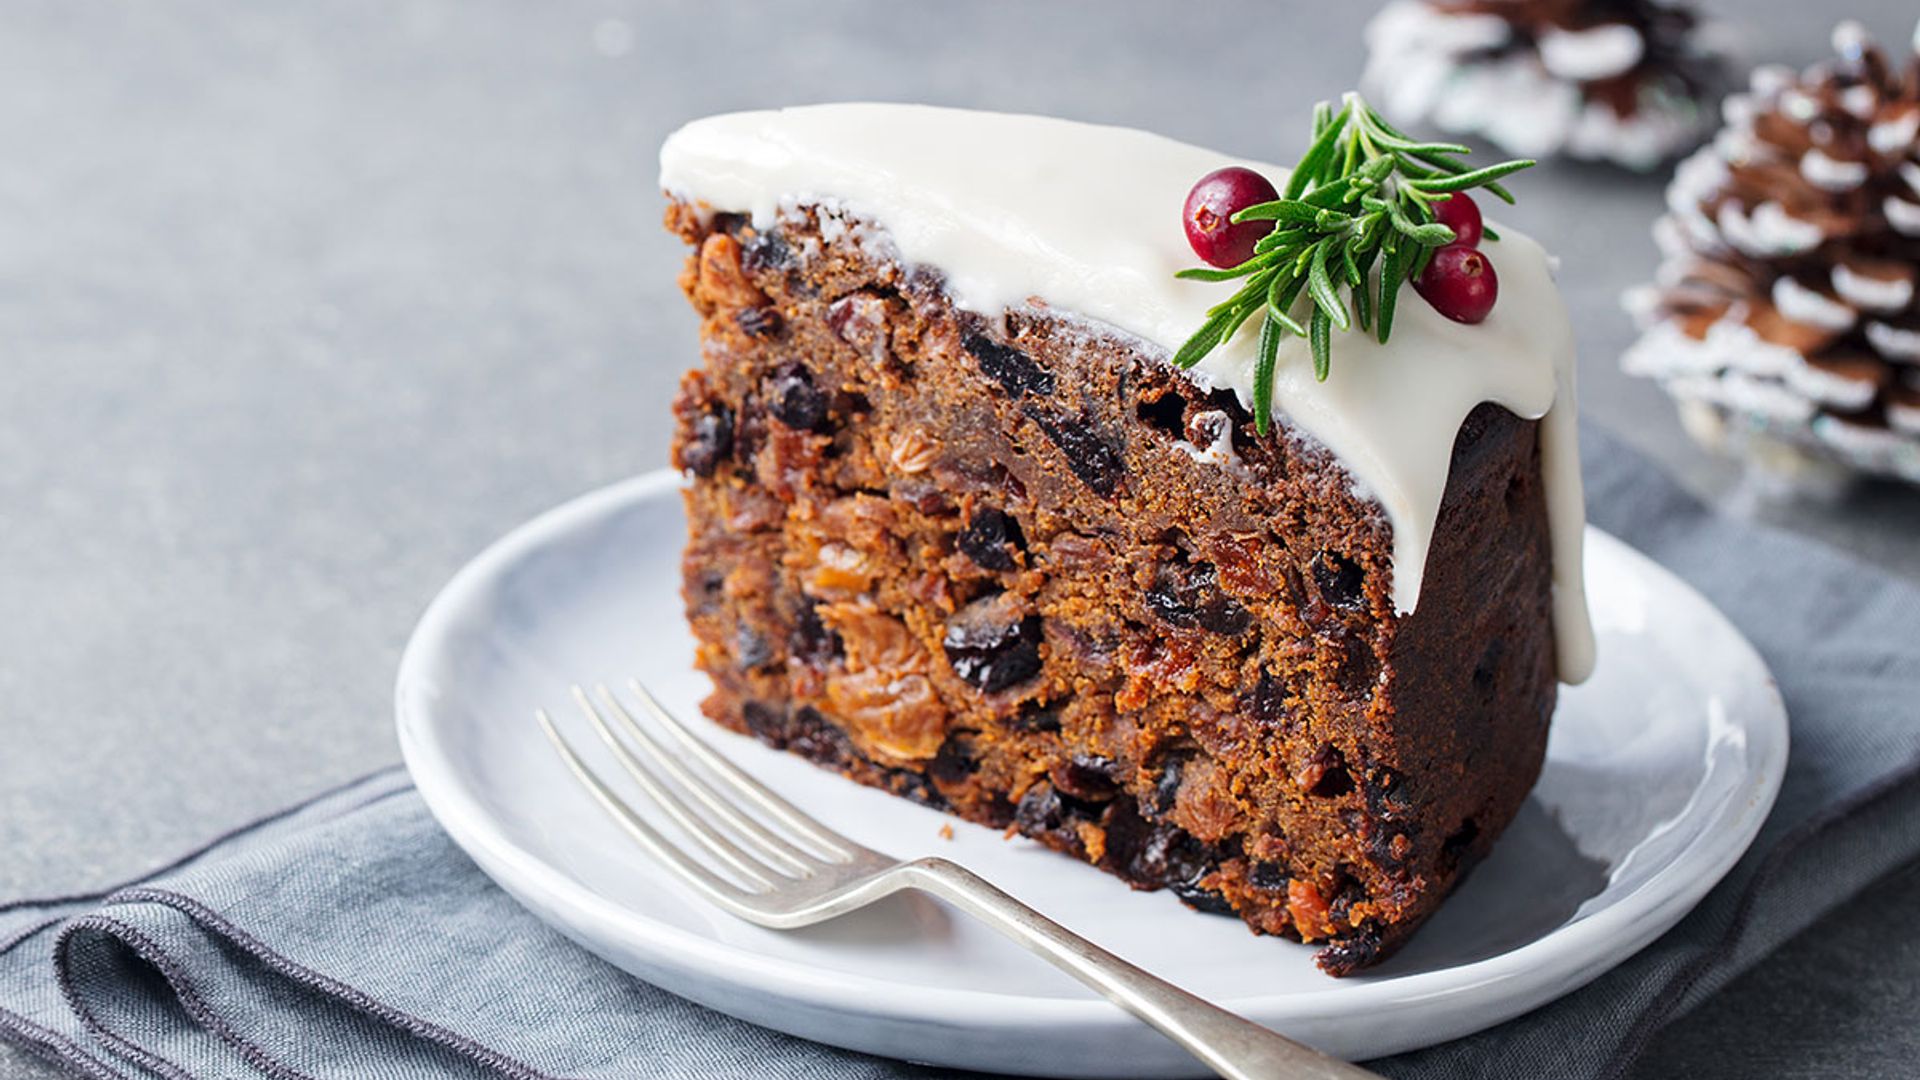 Mary Berry's Christmas cake recipe is the perfect festive treat